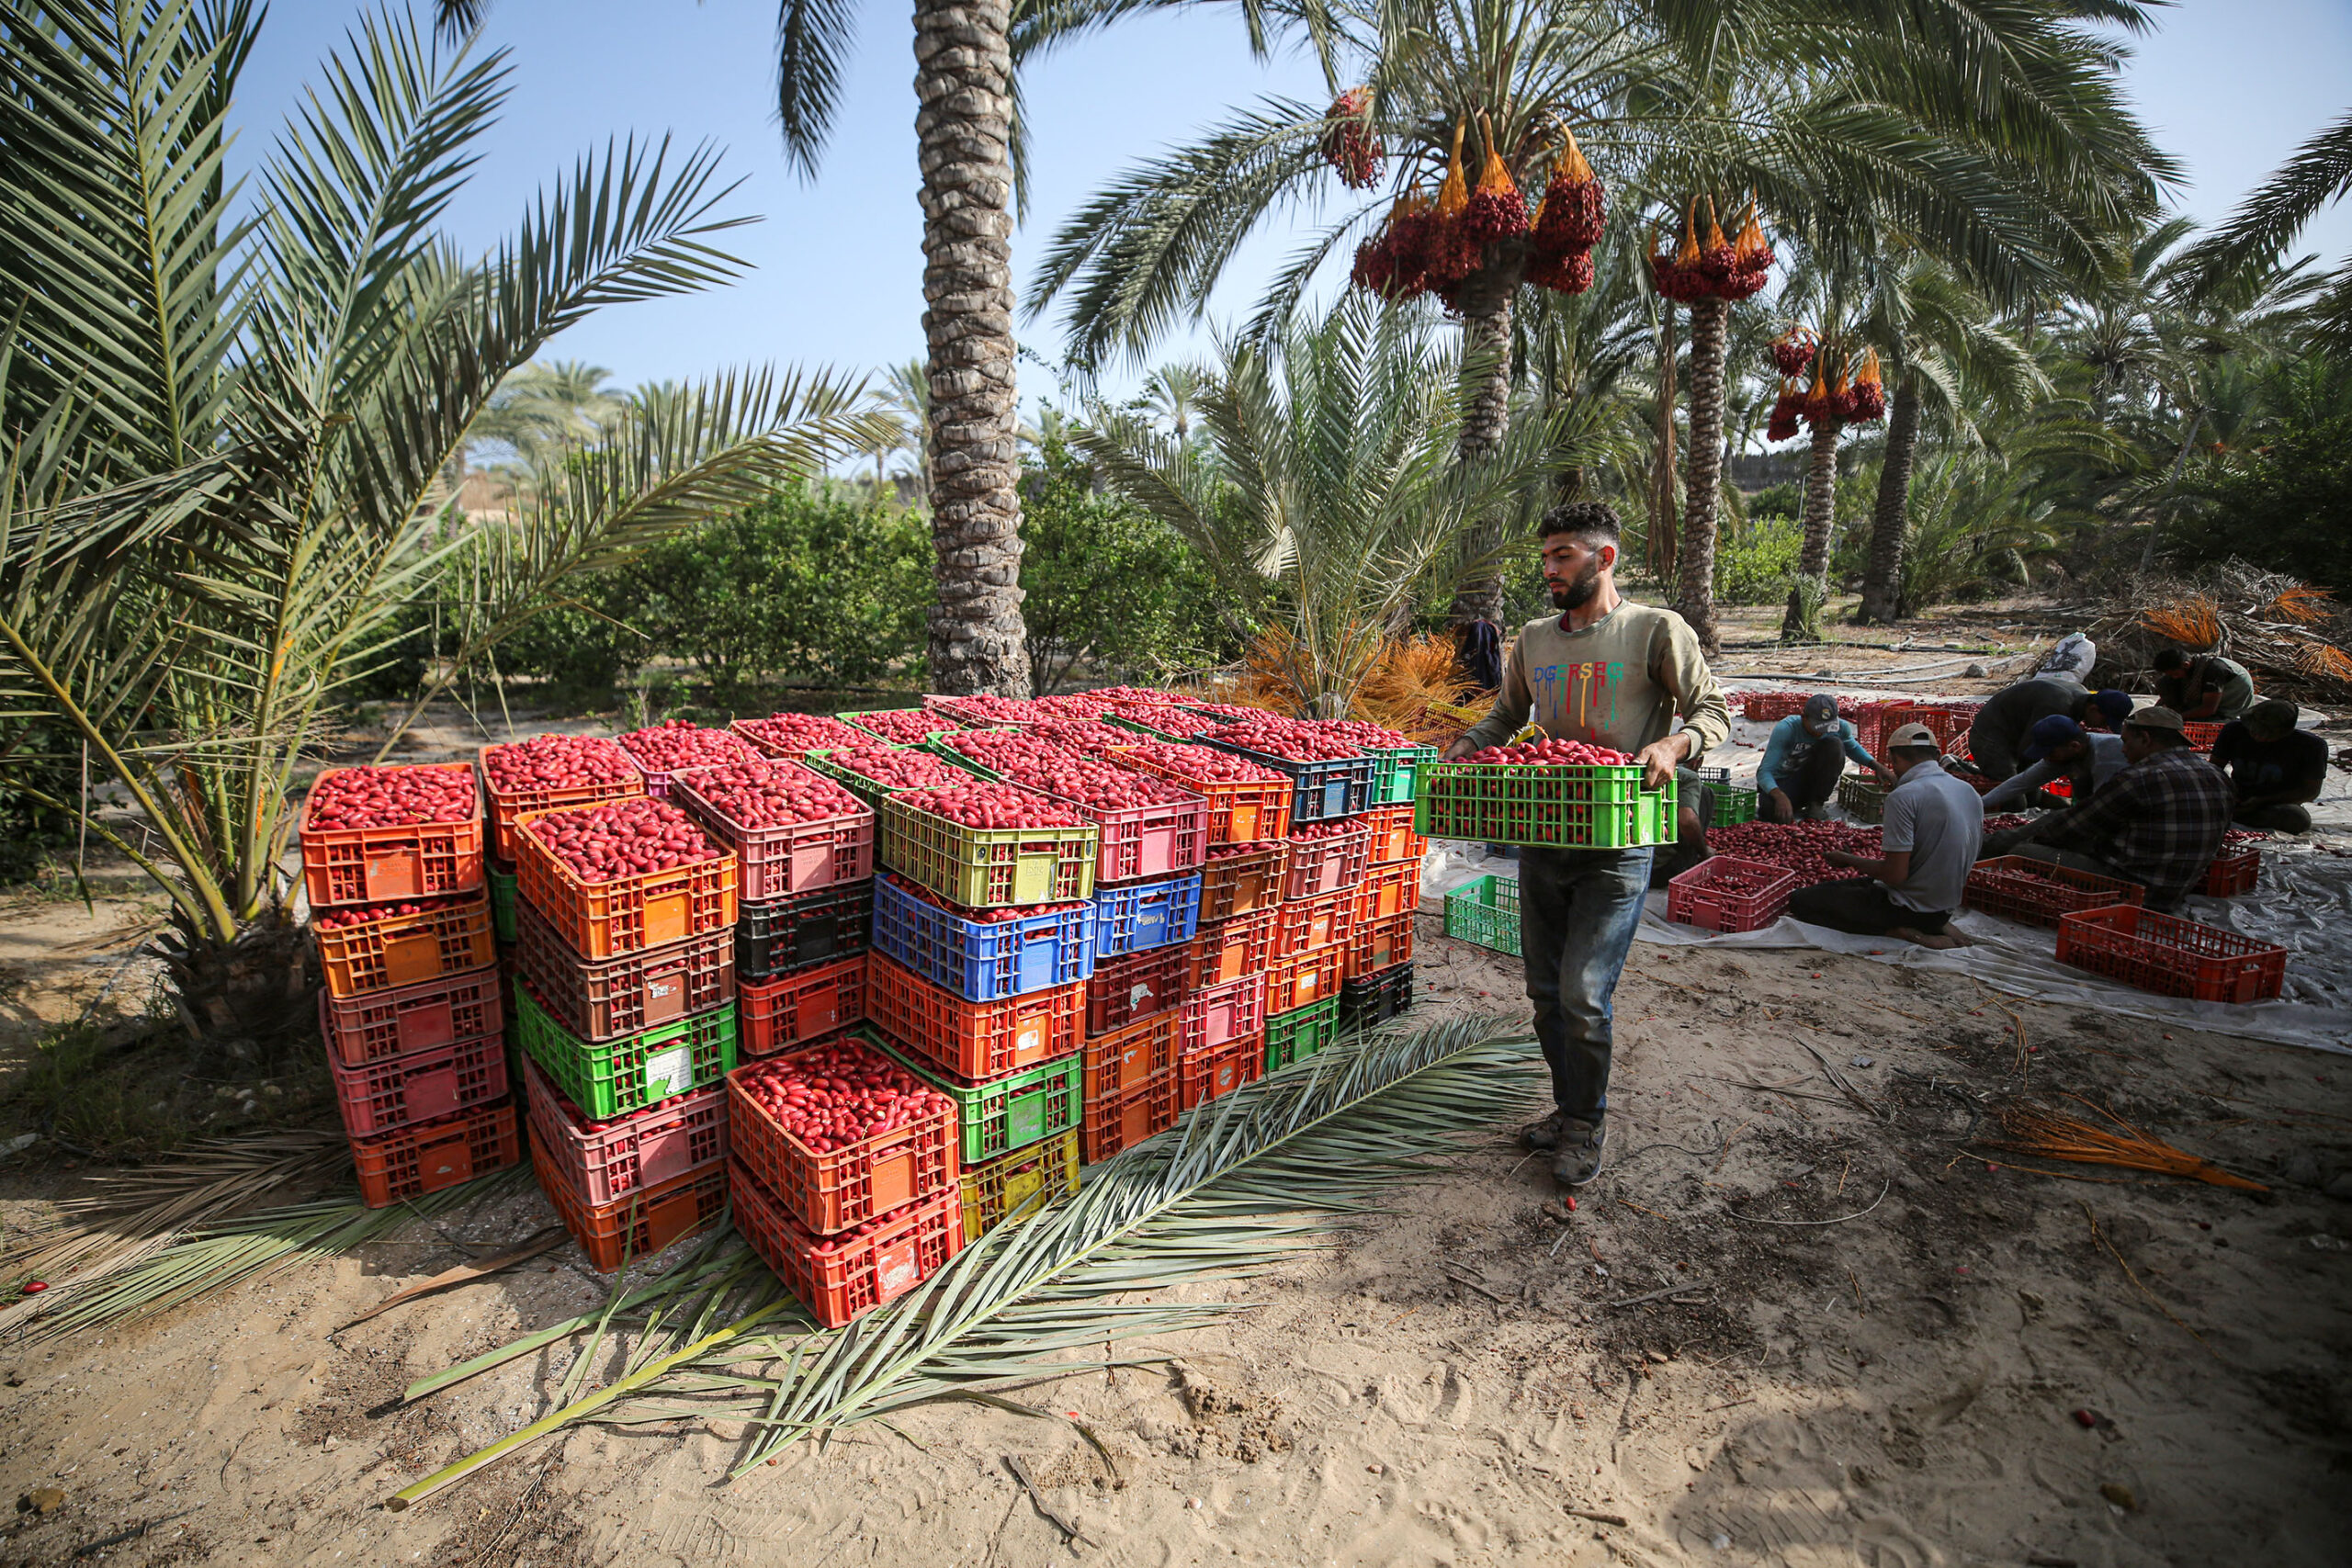 Palestinian farmers place the dates they collect in crates during harvest season in Deir al-Balah, Gaza on October 04, 2022 [Mustafa Hassona/Anadolu Agency]